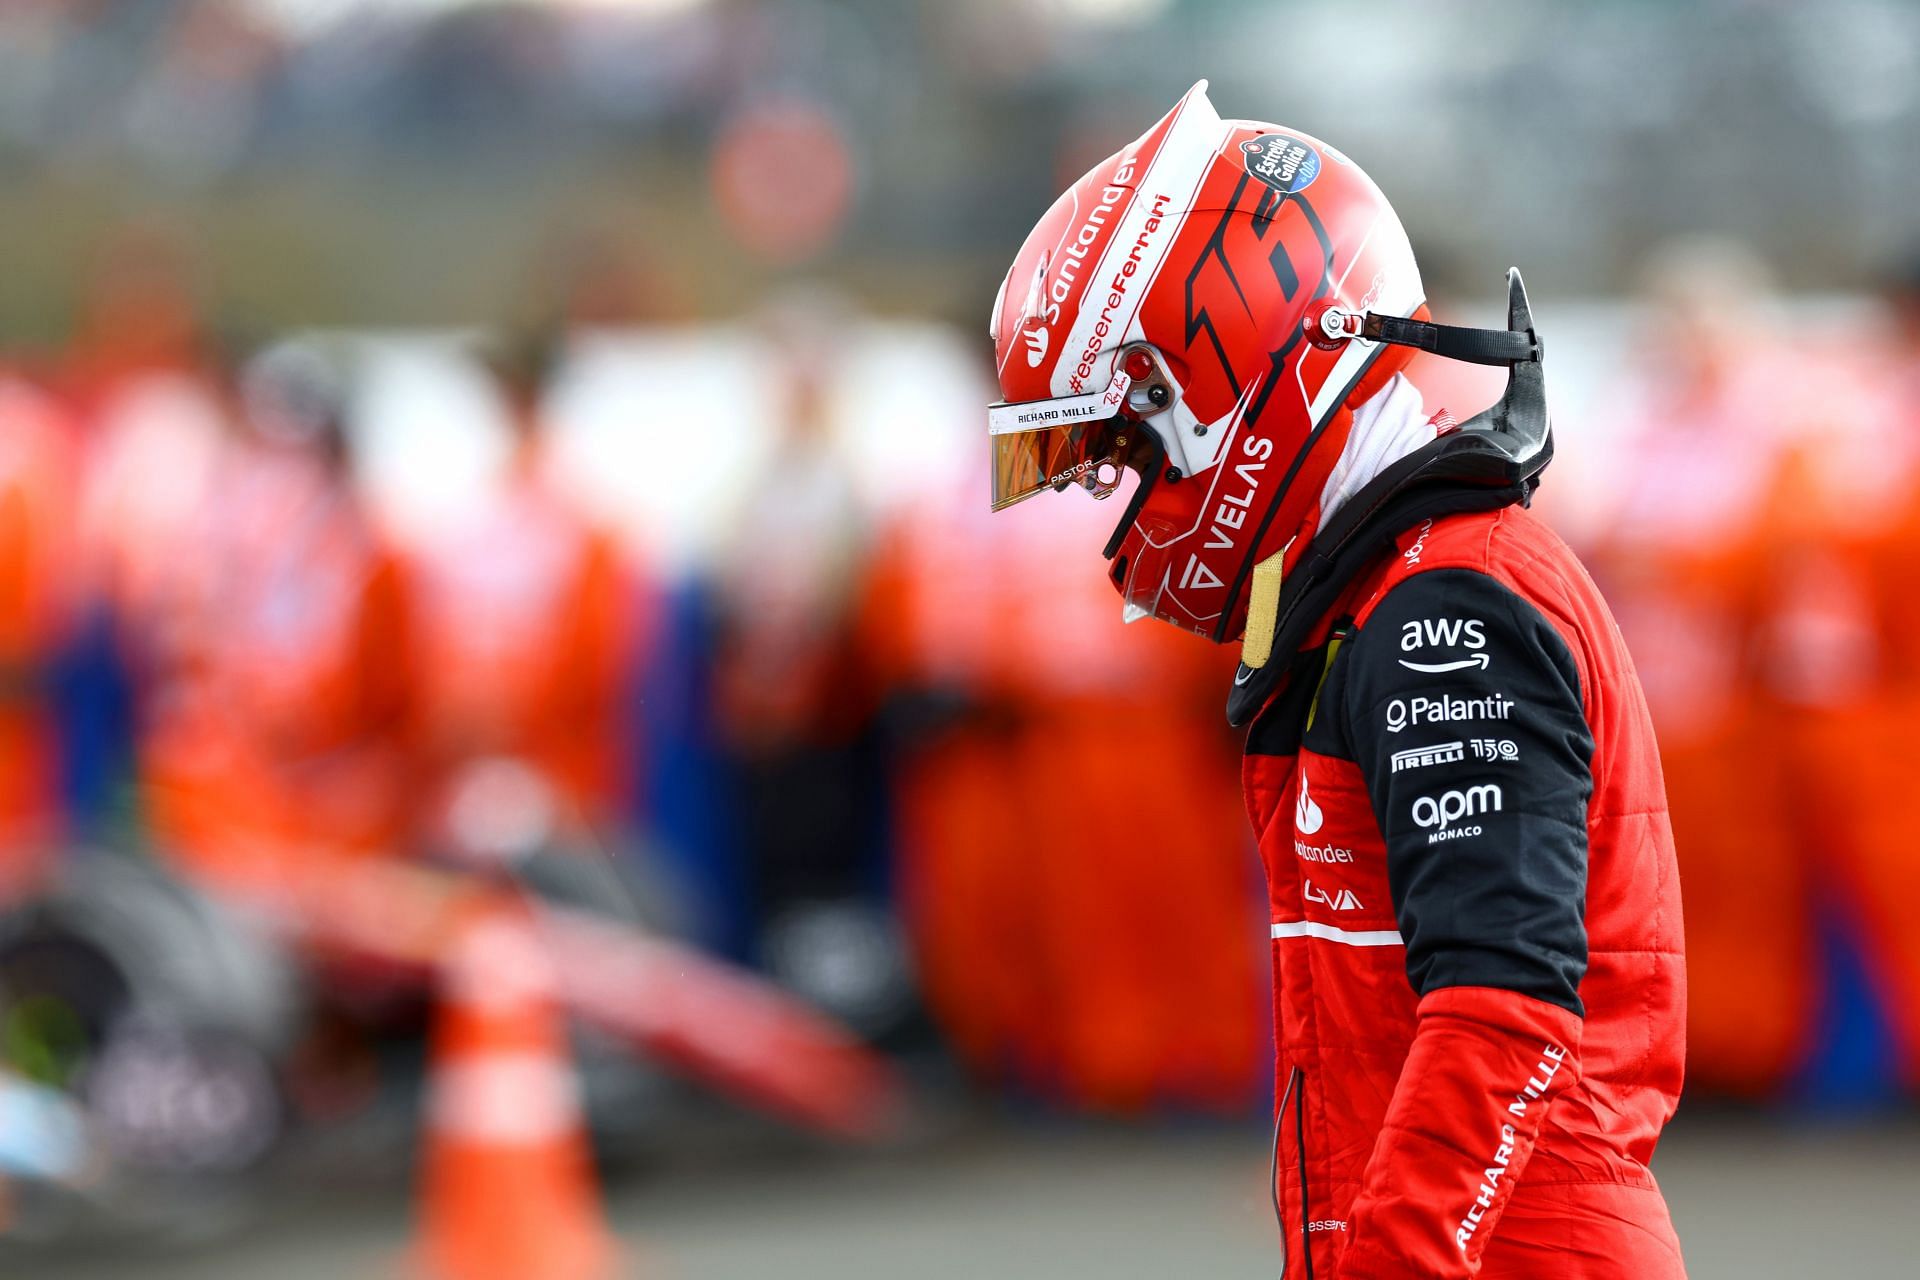 Ferrari driver Charles Leclerc in parc ferm&eacute; after his P4 finish at the 2022 F1 British GP (Photo by Mark Thompson/Getty Images)